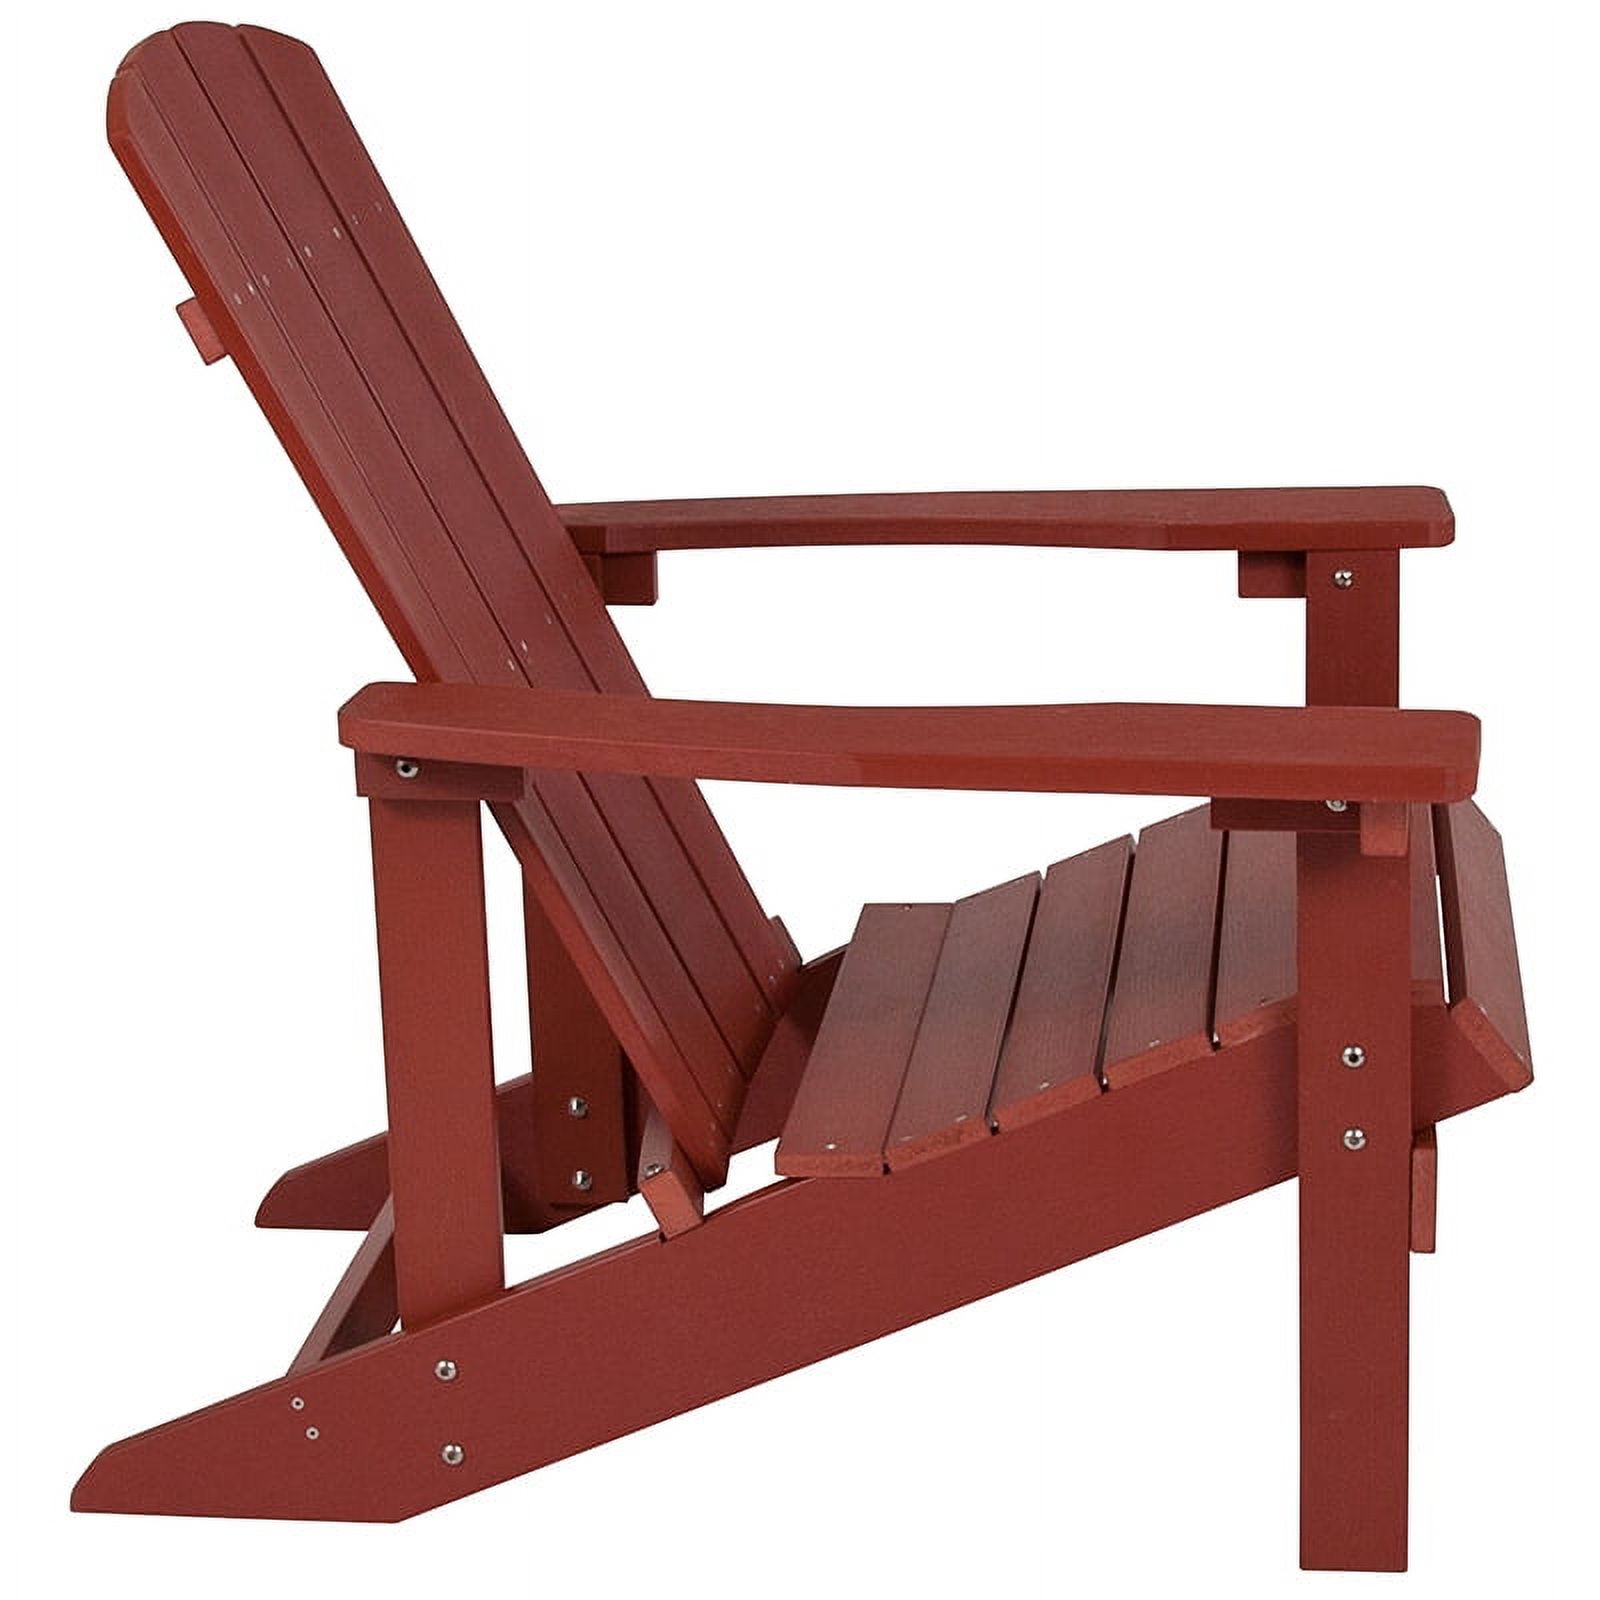 Flash Furniture Charlestown All-Weather Poly Resin Wood Adirondack Chair in Red - image 2 of 12